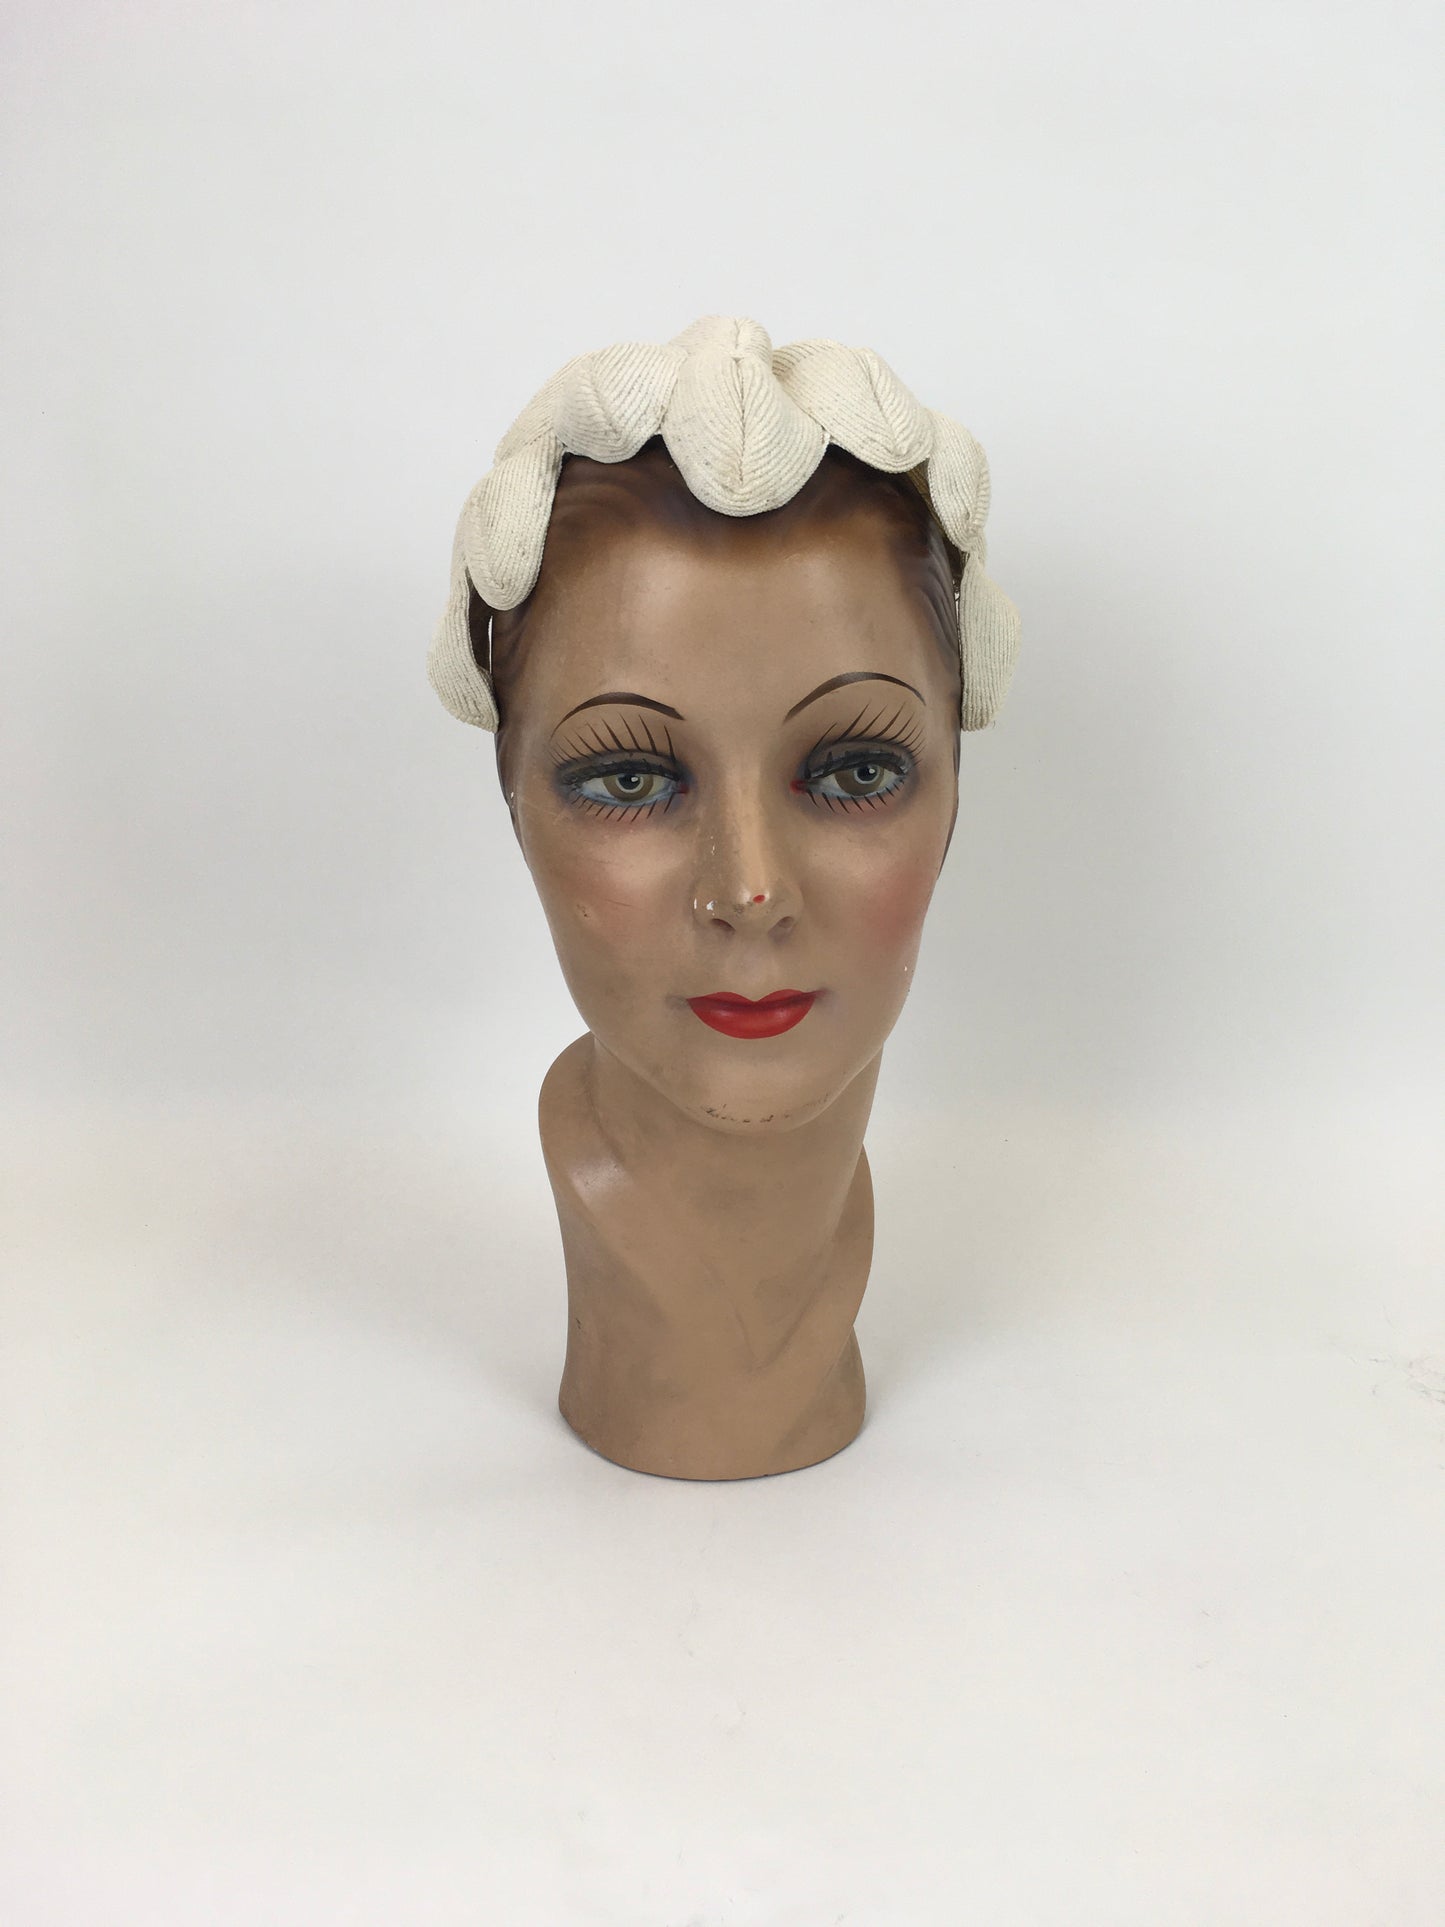 Original 1950’s Darling Structured Headpiece - In Soft Ivory